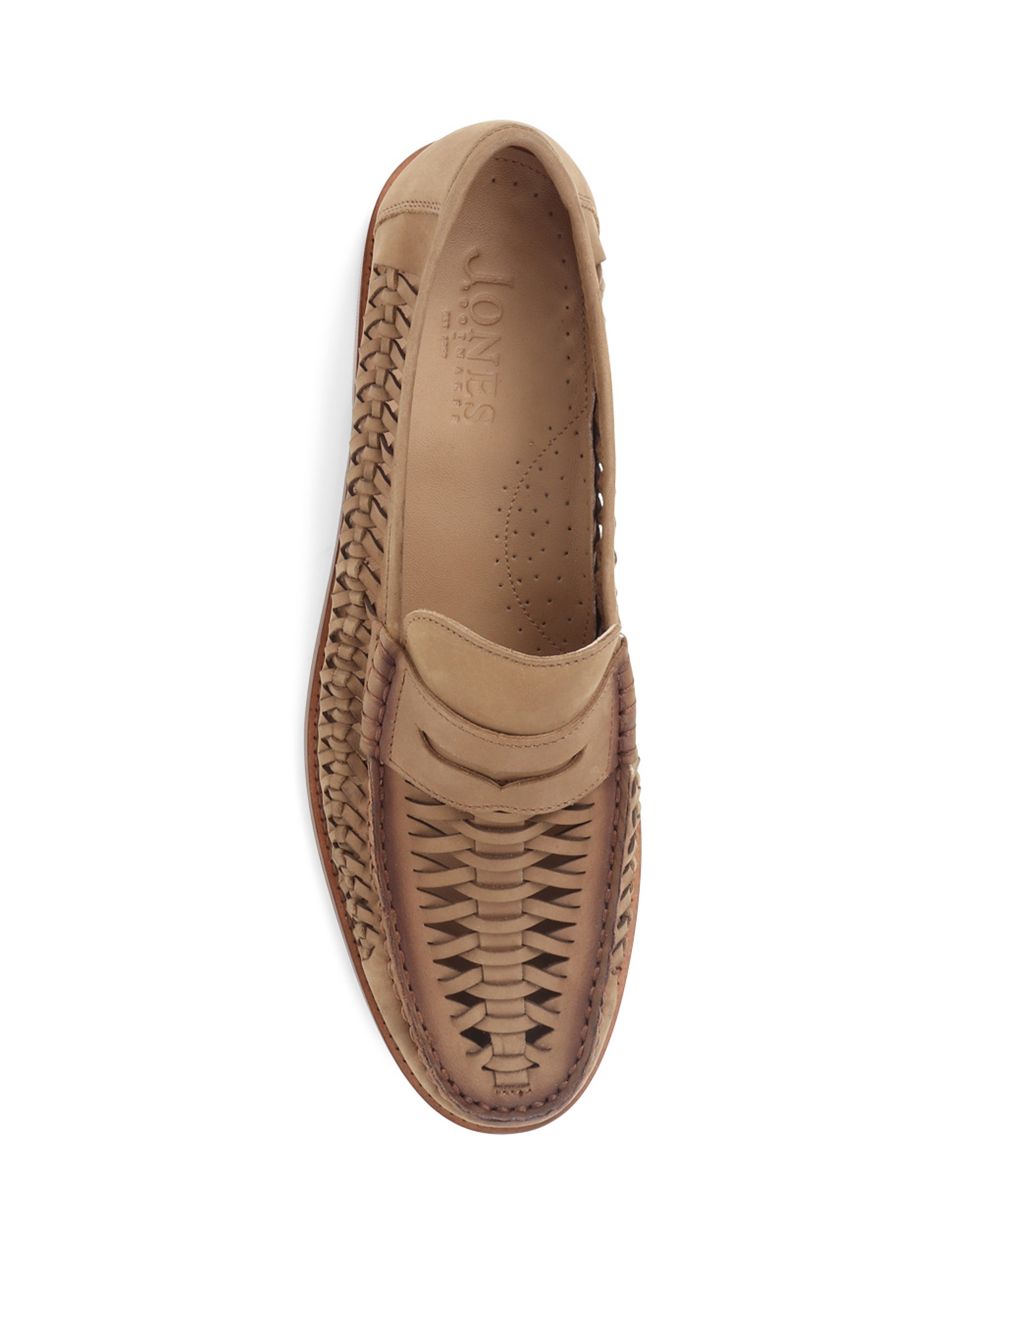 Leather Slip-On Loafers image 5